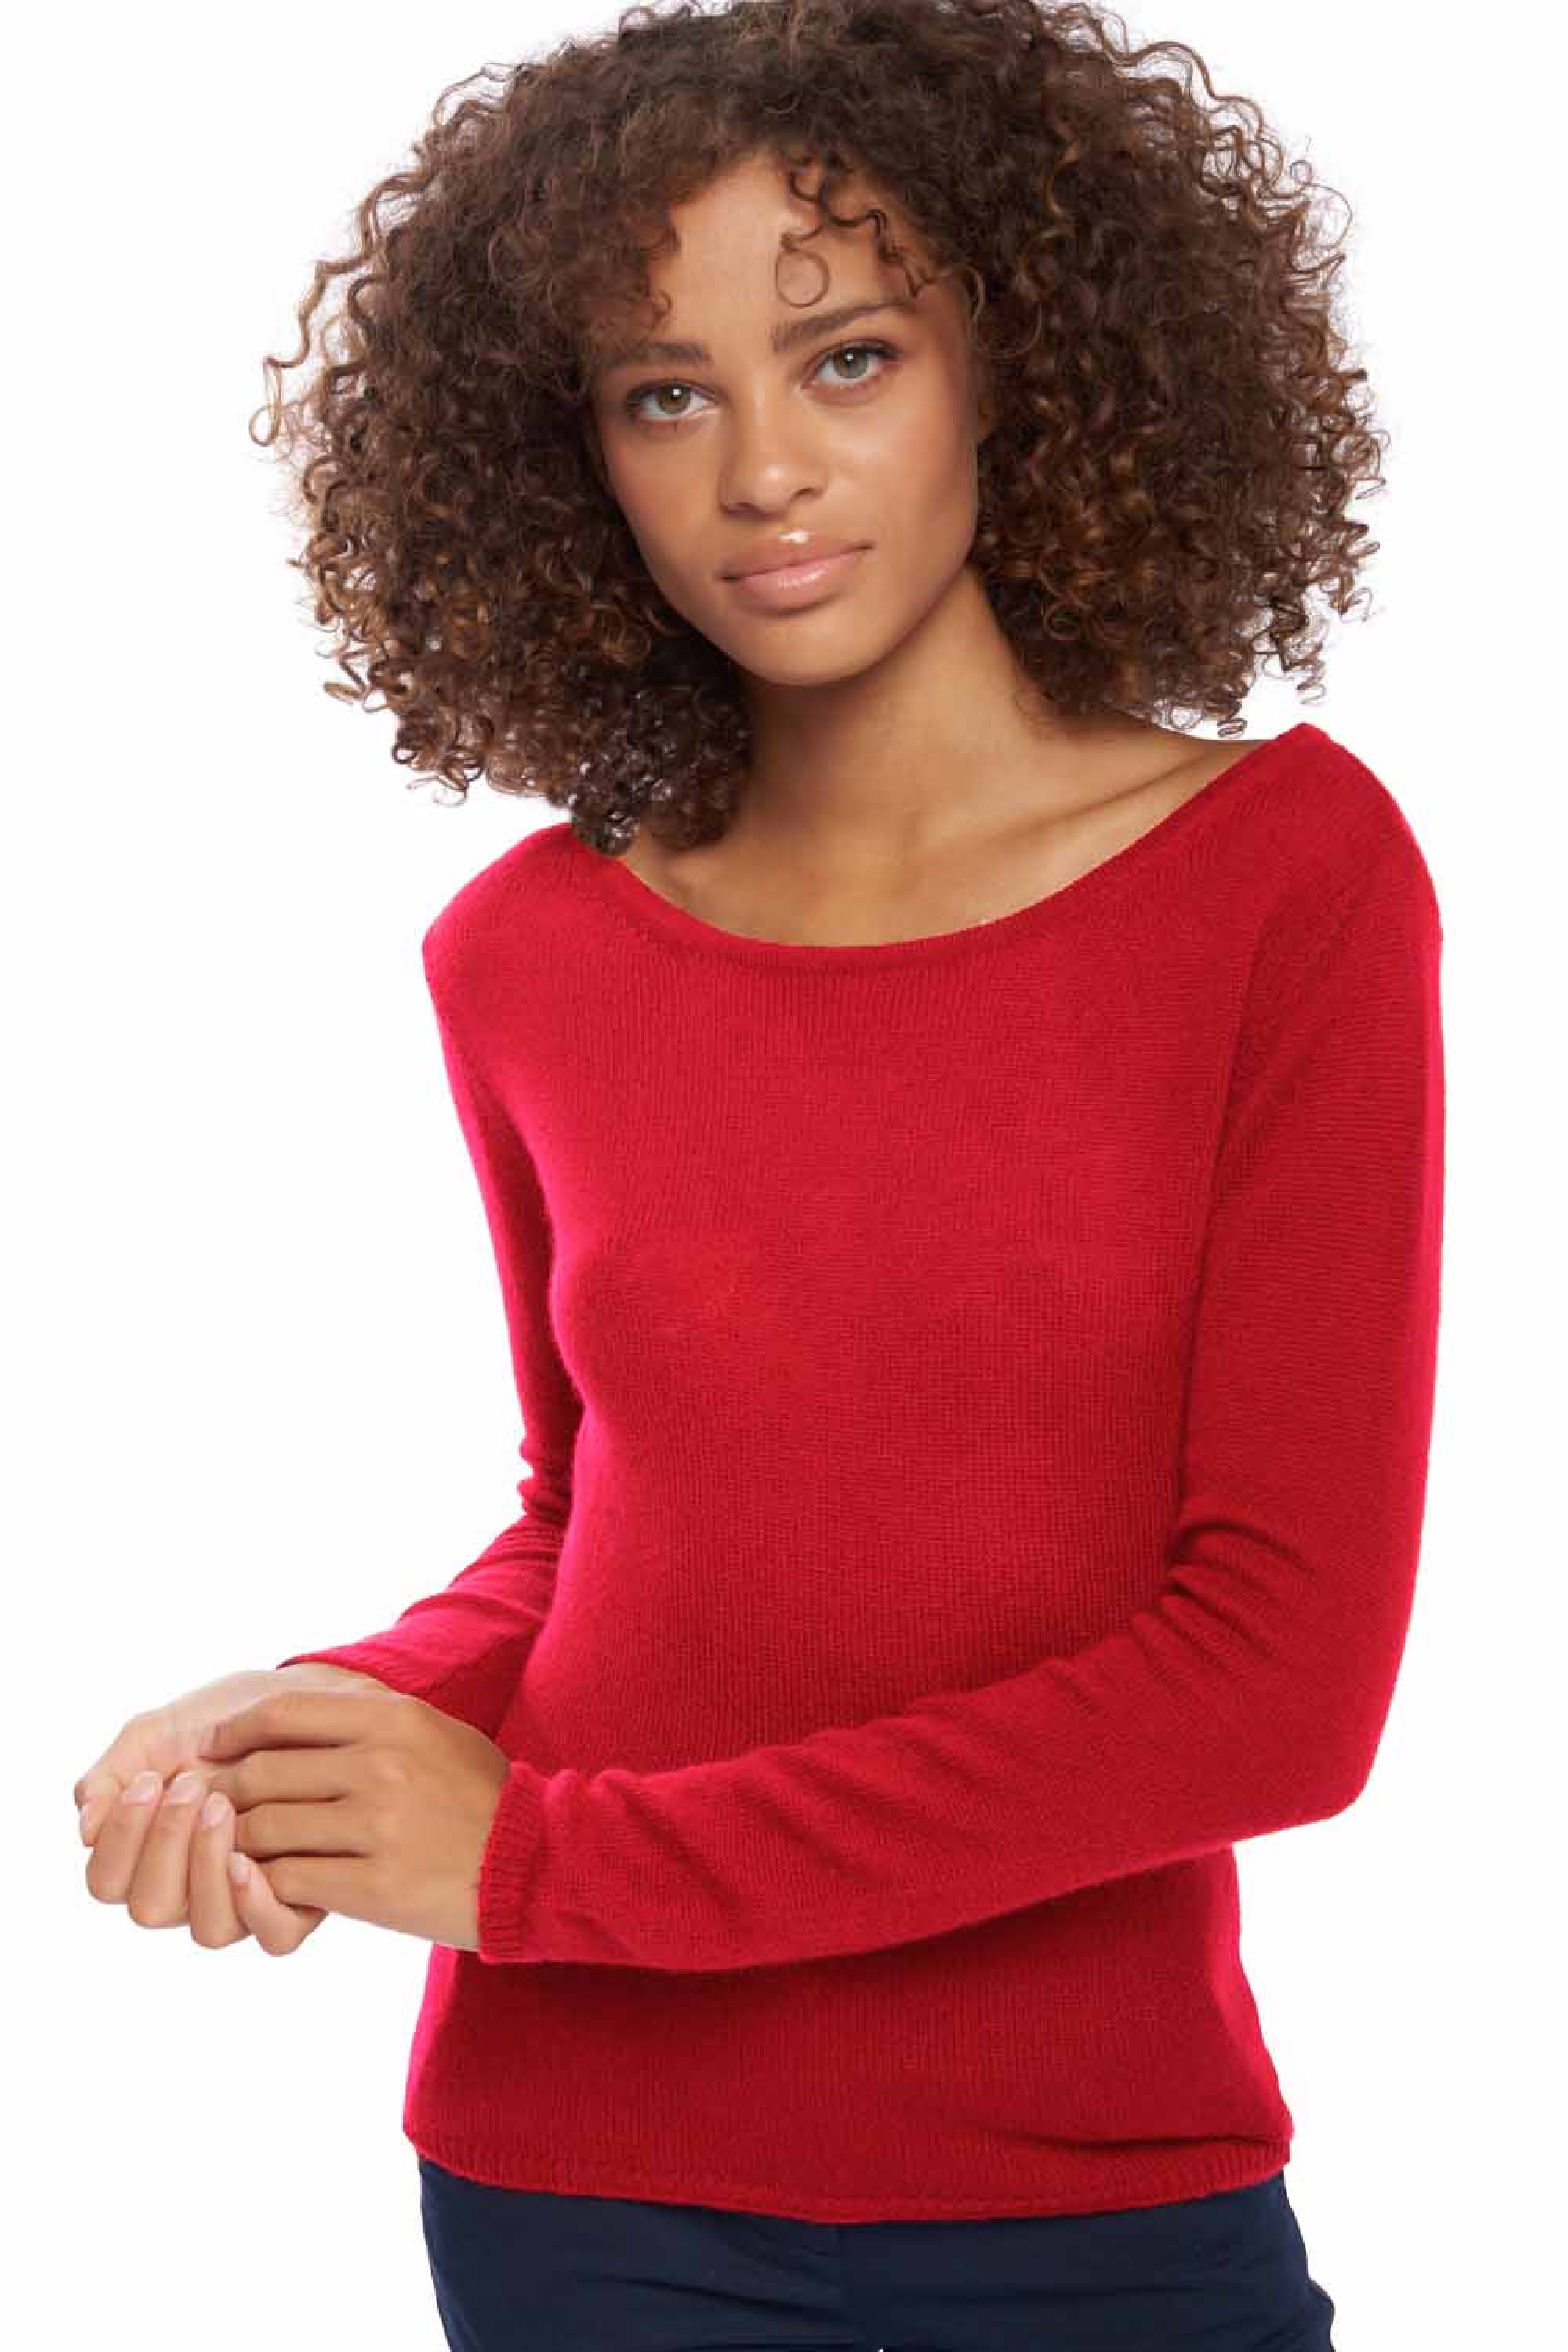 Cashmere ladies timeless classics caleen blood red 2xl